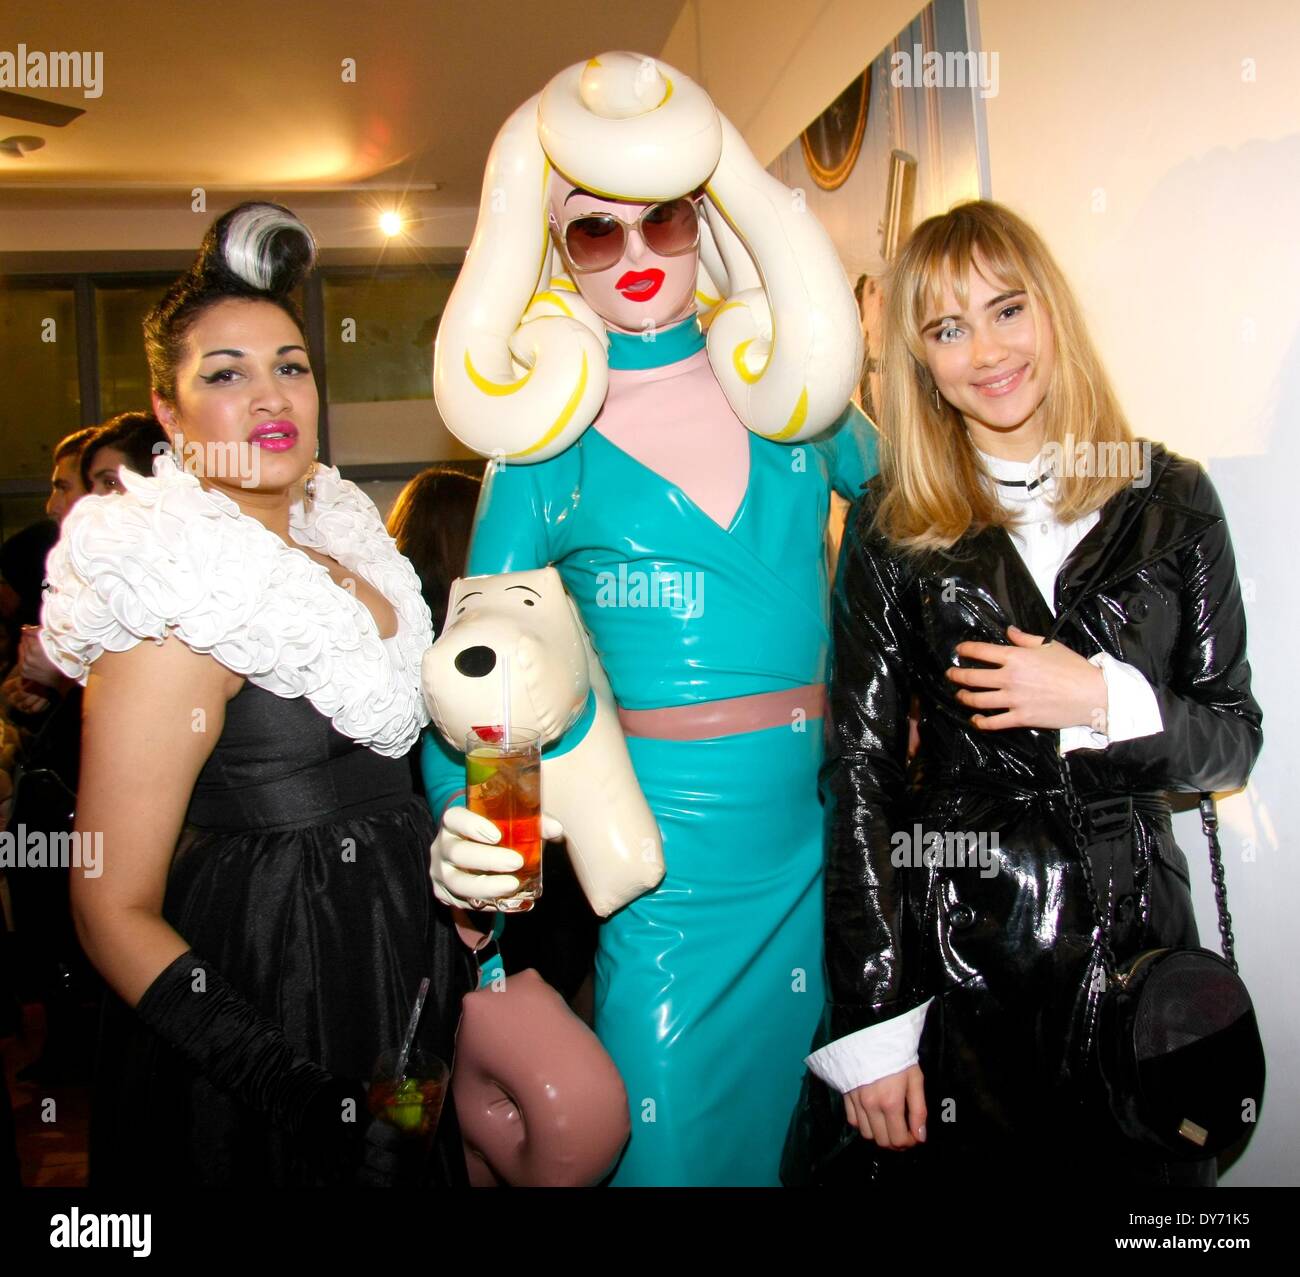 Snow Queen Vodka Calender 2013 launch held at Gallery DIFFERENT Featuring: Pandemonia,Bishi,Suki Waterhouse Where: London United Kingdom When: 18 Dec 2012 Stock Photo